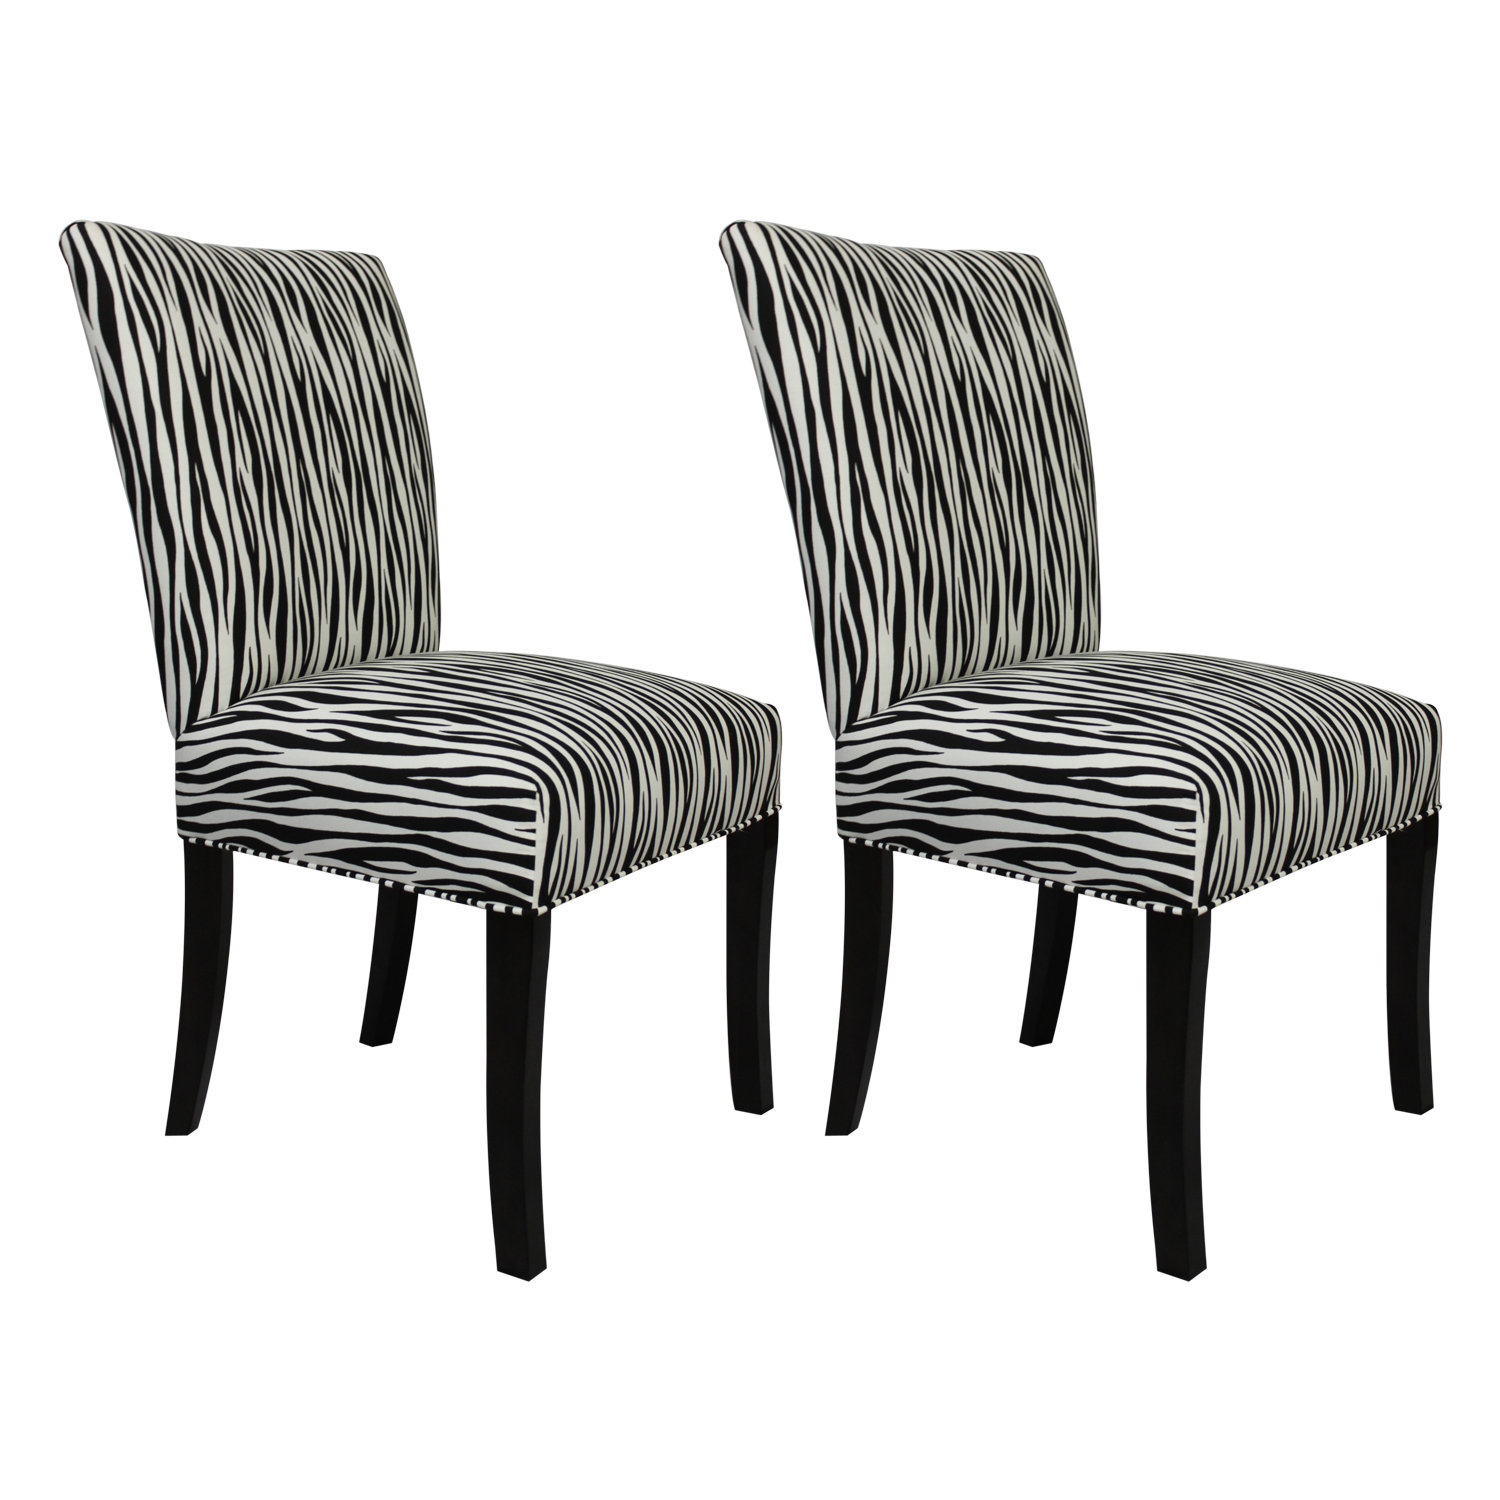 Sole Designs  Julia Miami Dining Chairs (Set of 2)